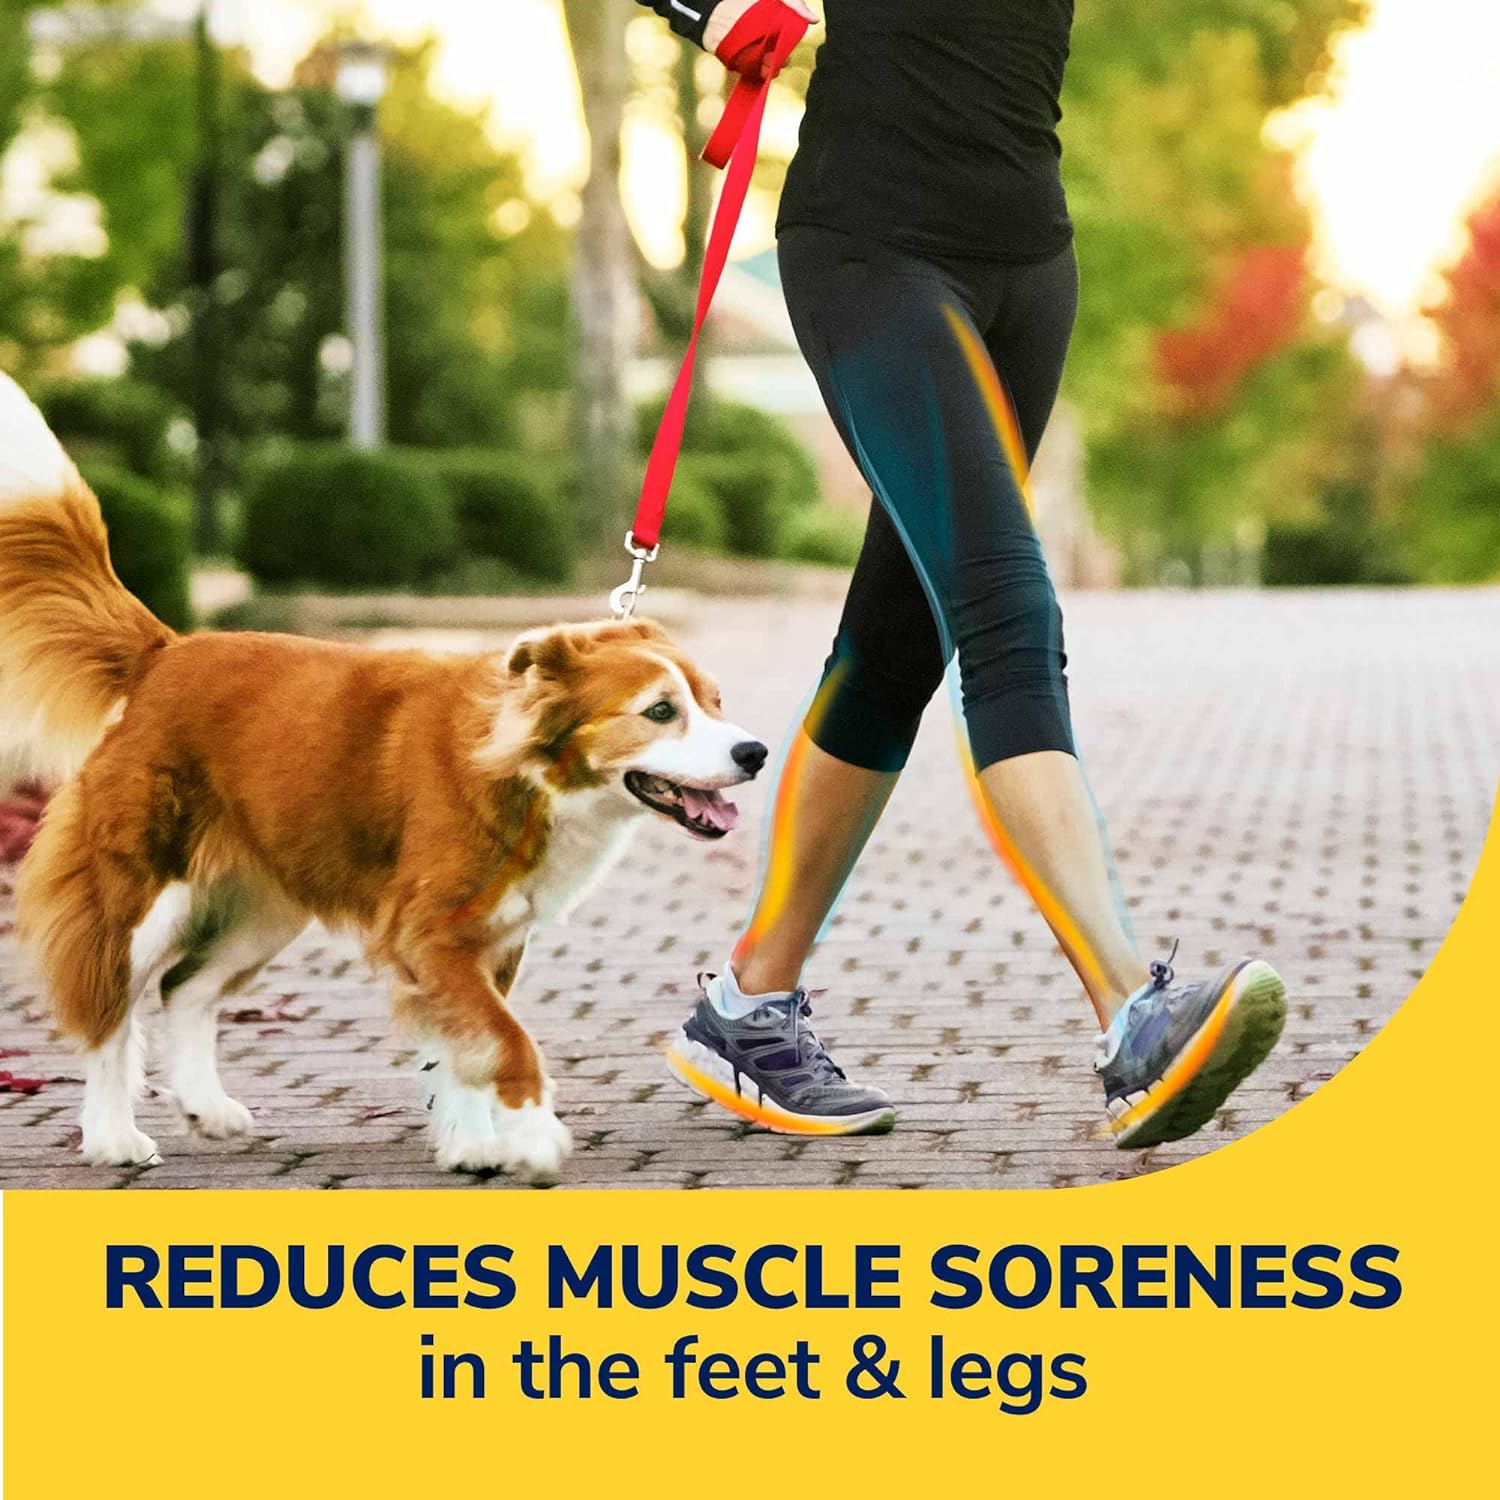 Dr. Scholls Walk Longer Insoles, Comfortable Plush Foam Cushioning Inserts for Walking, Hiking, and Standing on Feet All-Day, Stop Soreness in Feet  Legs, Trim to Fit Womens Shoe Size 6-10, 1 Pair